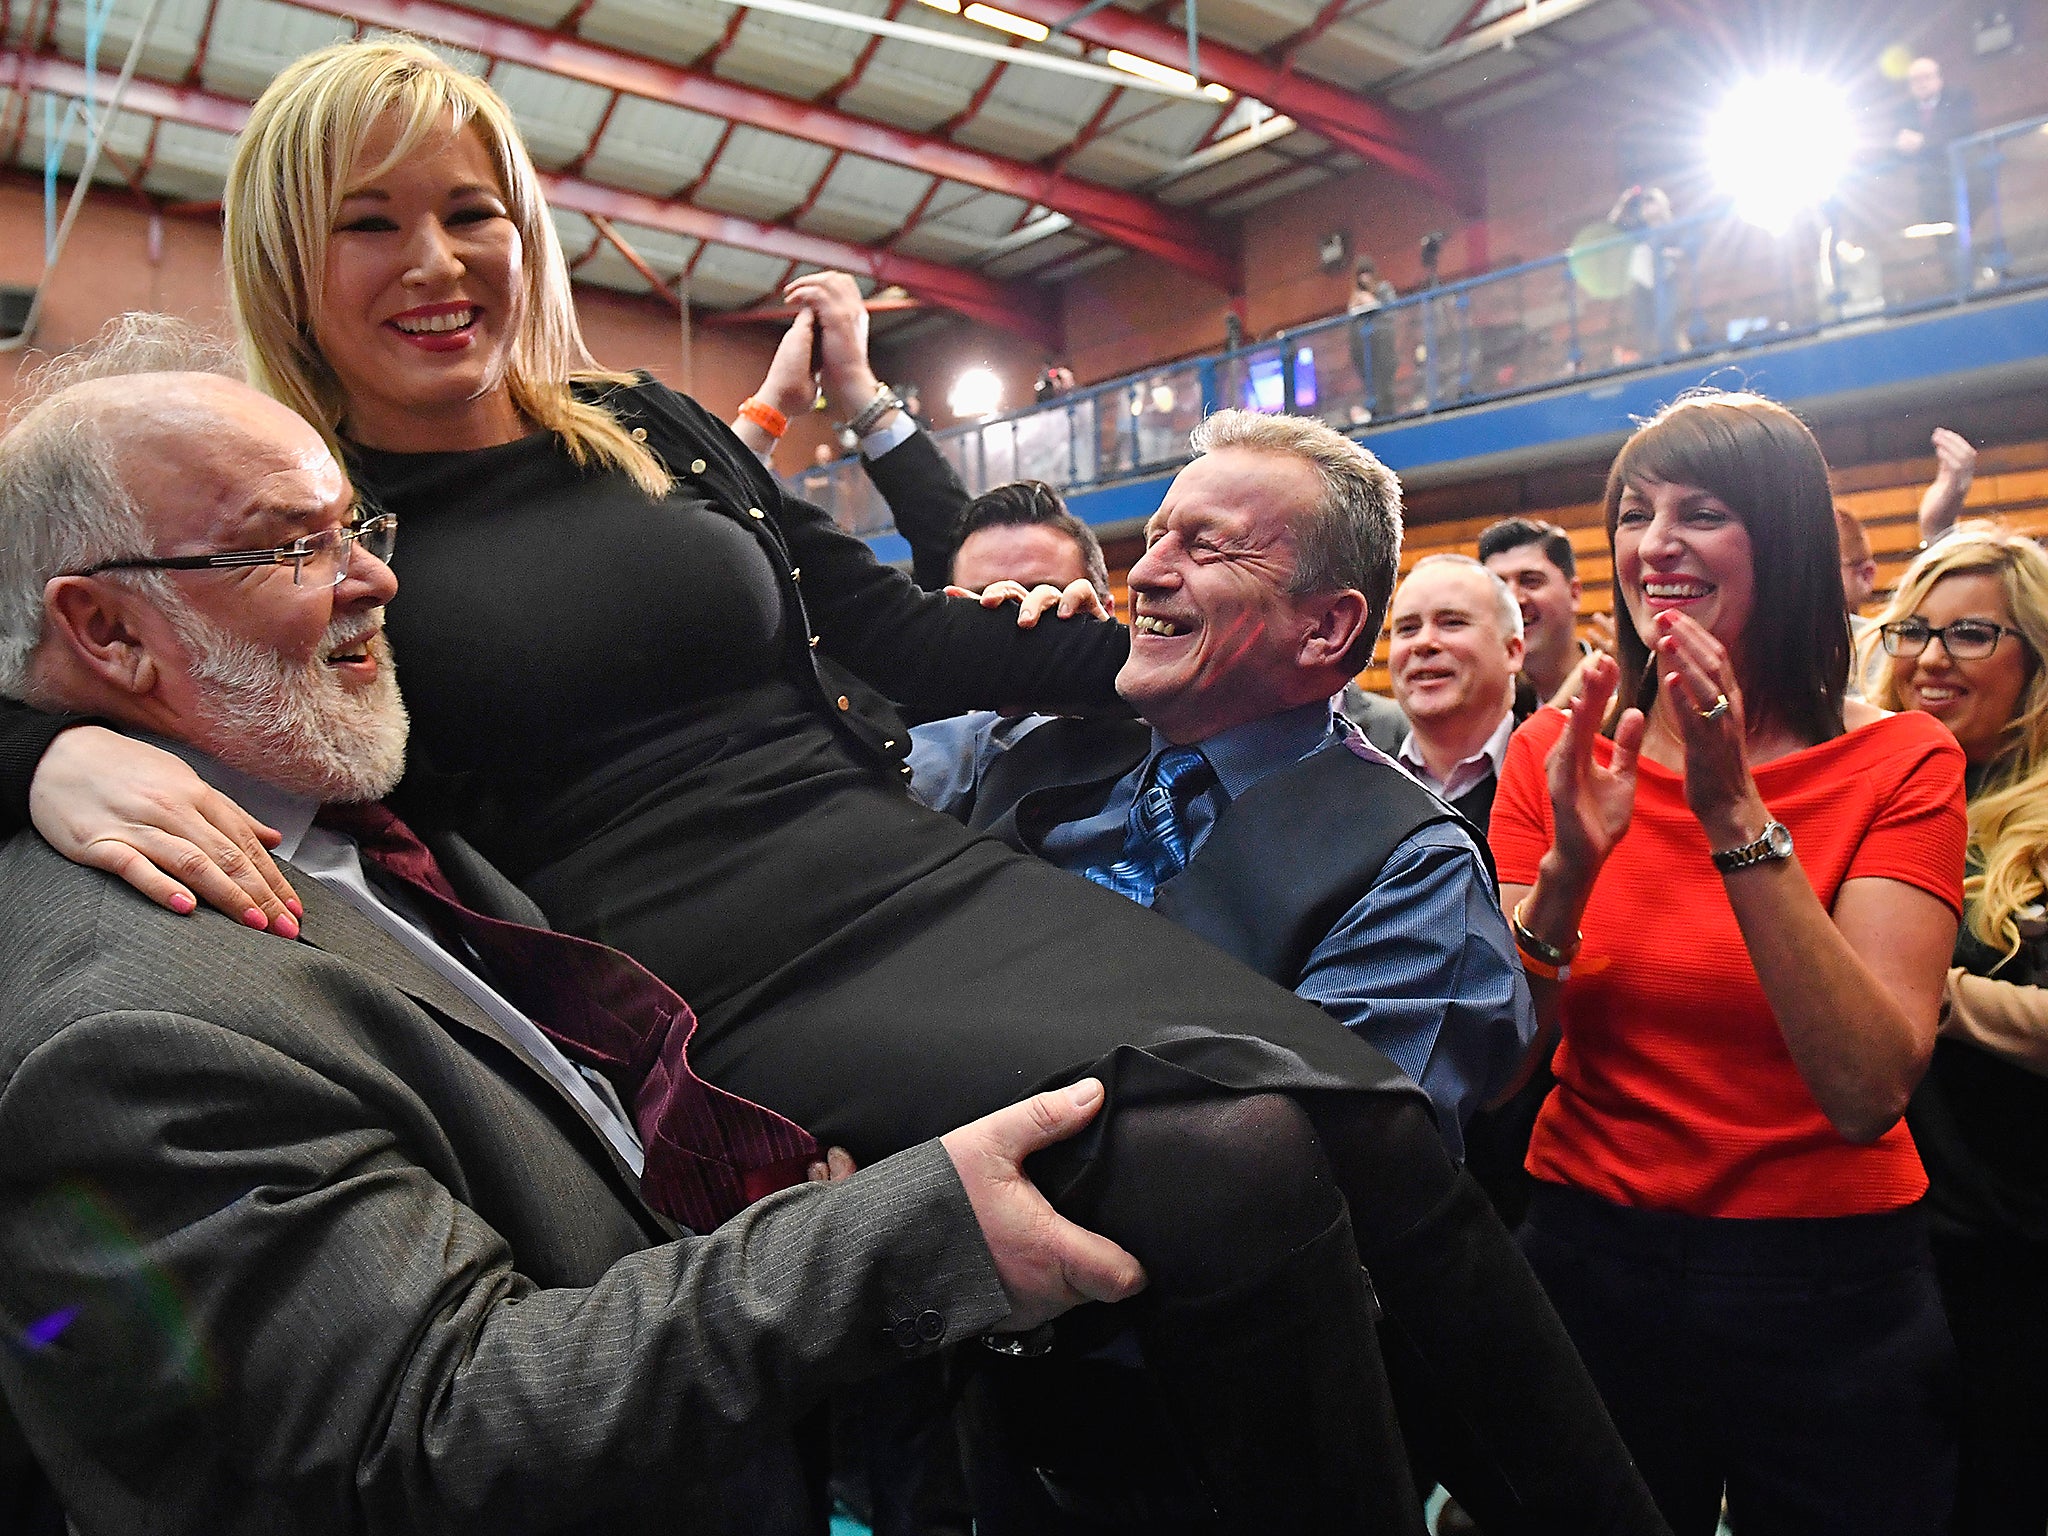 Sinn Fein made significant gains in the Northern Ireland elections